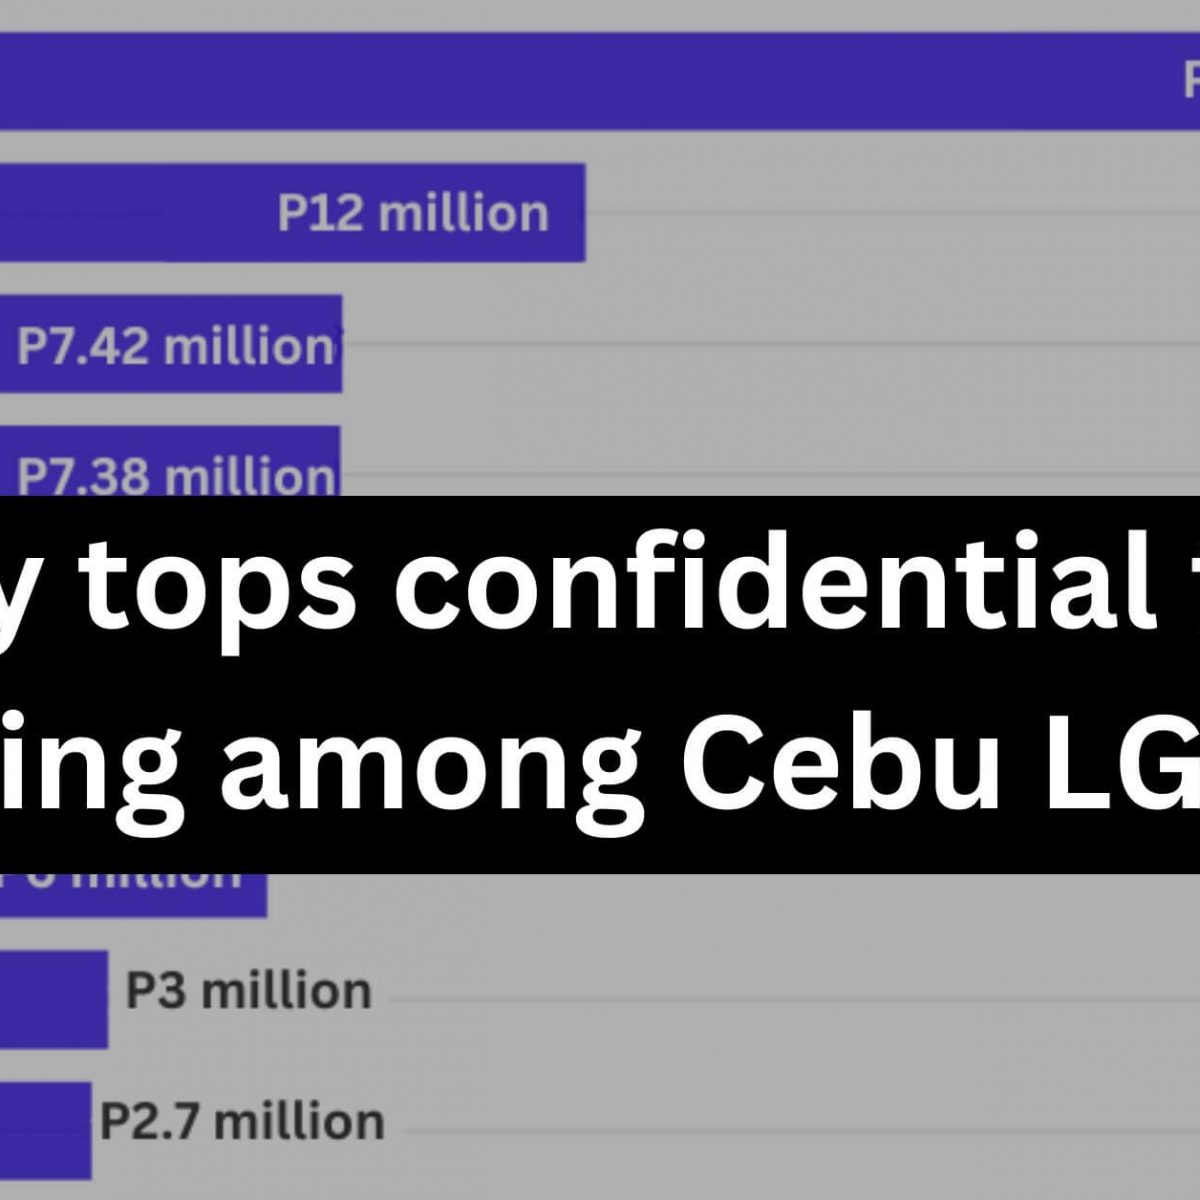 Talisay City tops Cebu LGUs in spending confidential funds in 2022